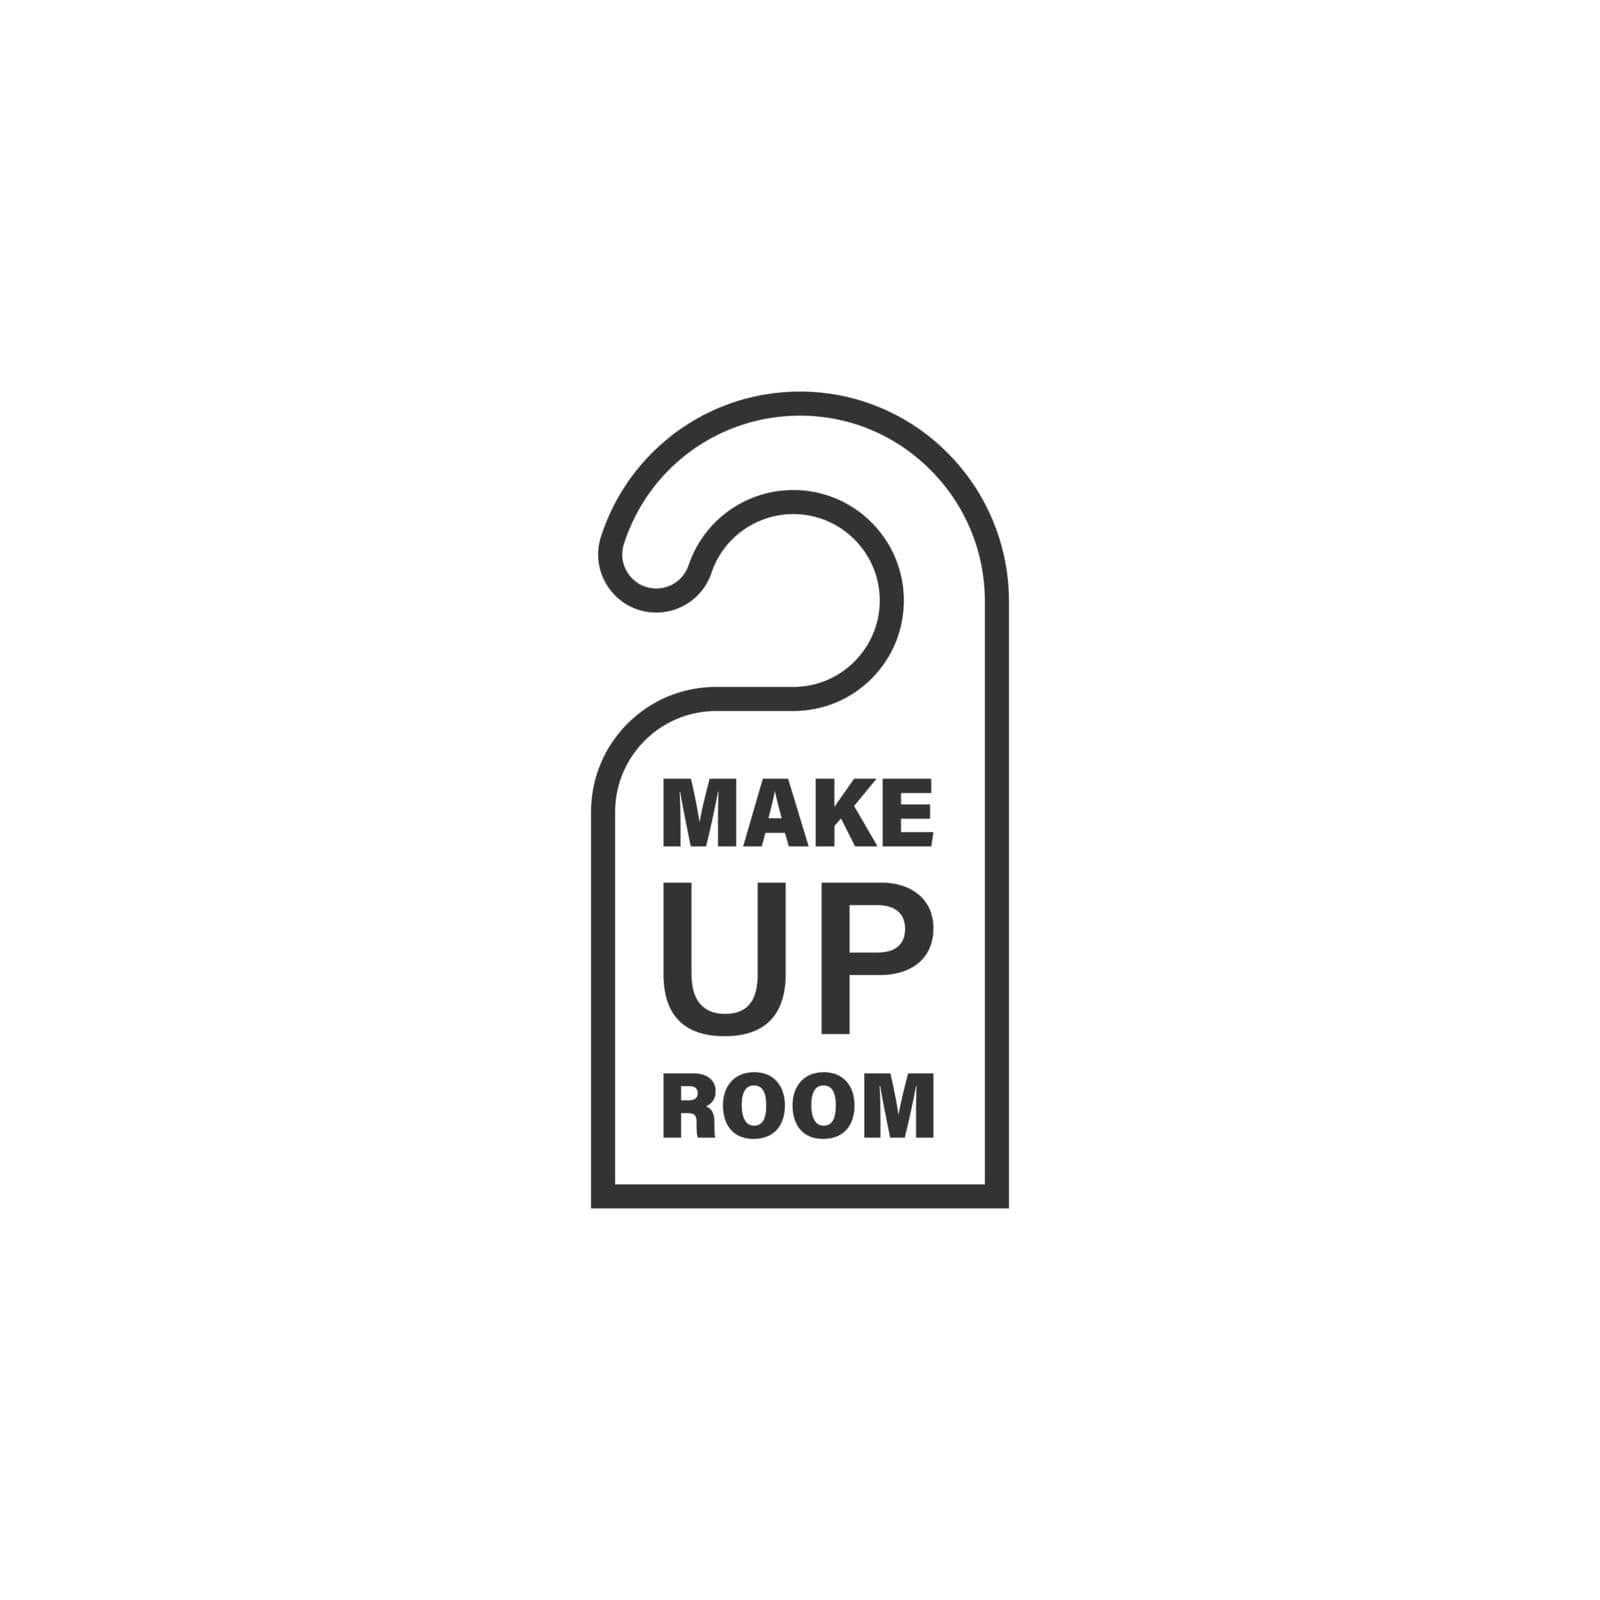 Make up room hotel sign icon in flat style. Inn vector illustration on white isolated background. Hostel clean business concept. by LysenkoA